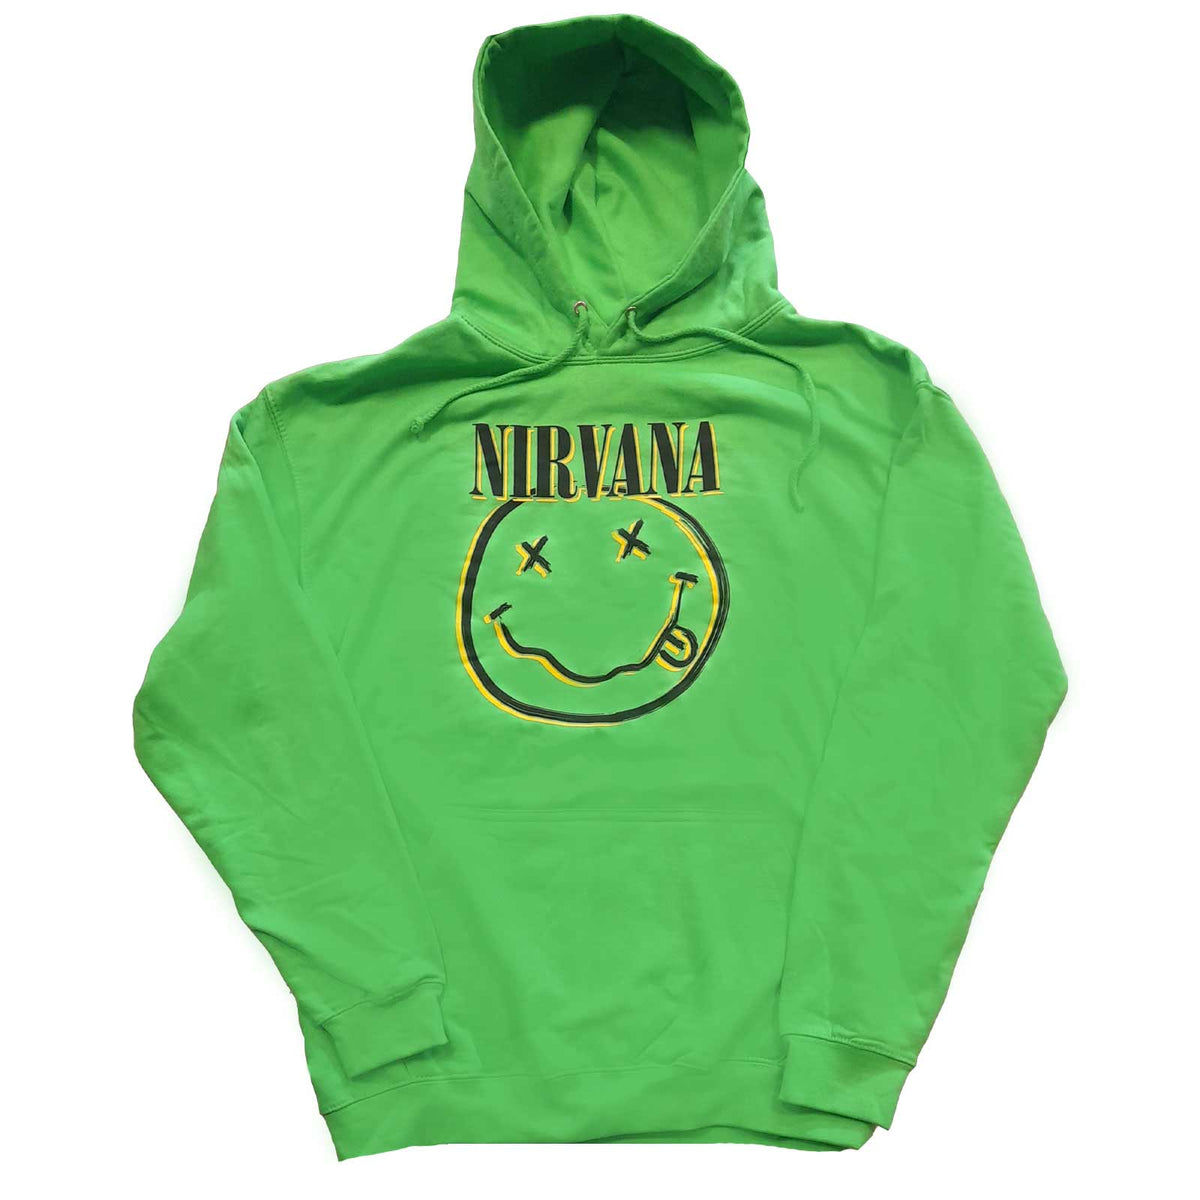 Nirvana Hoodie - Inverse Happy Face - Green Official Licensed Design